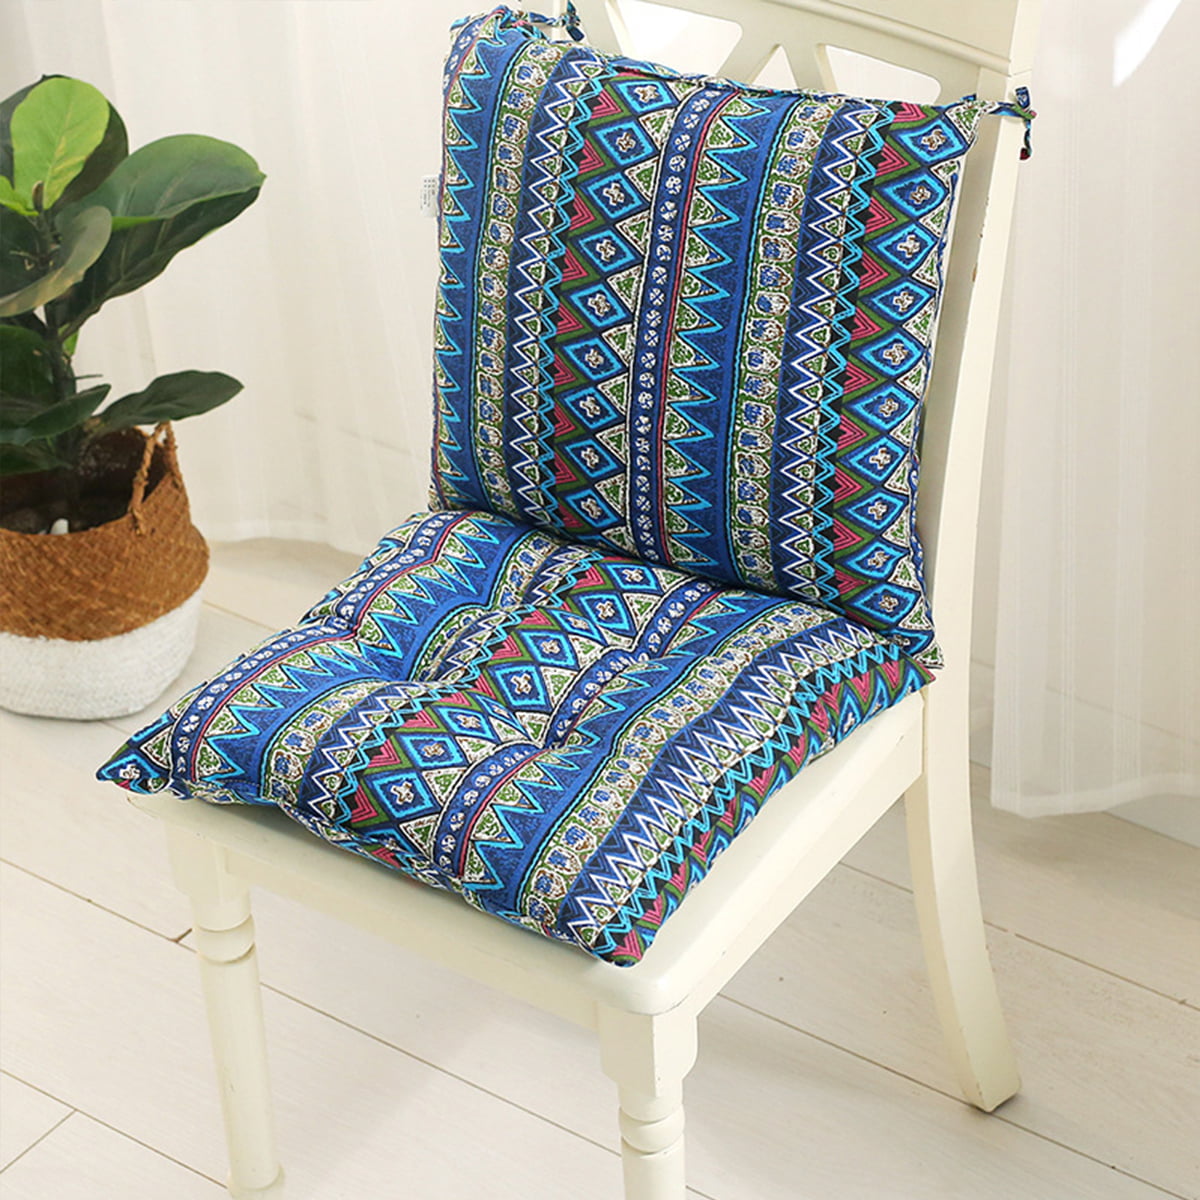  dining room chair cushions